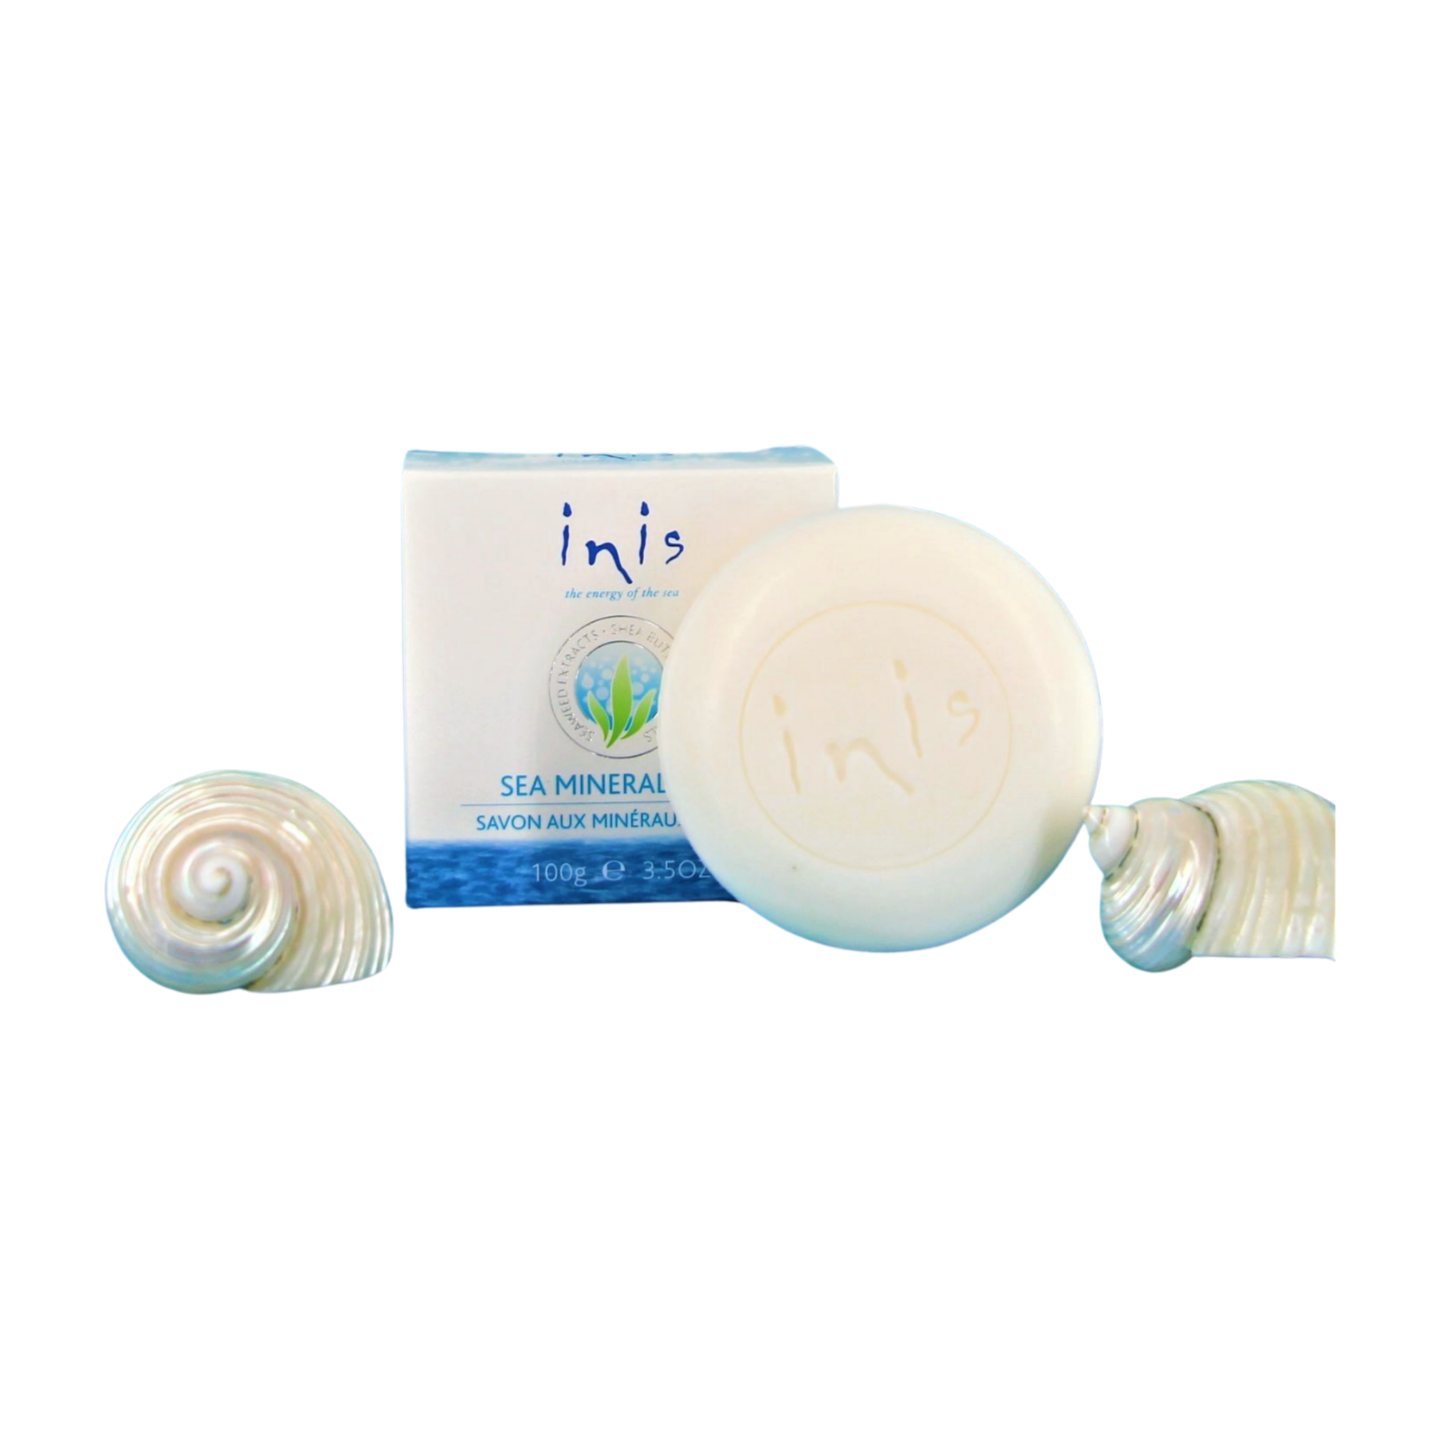 inis - Sea Mineral Soap